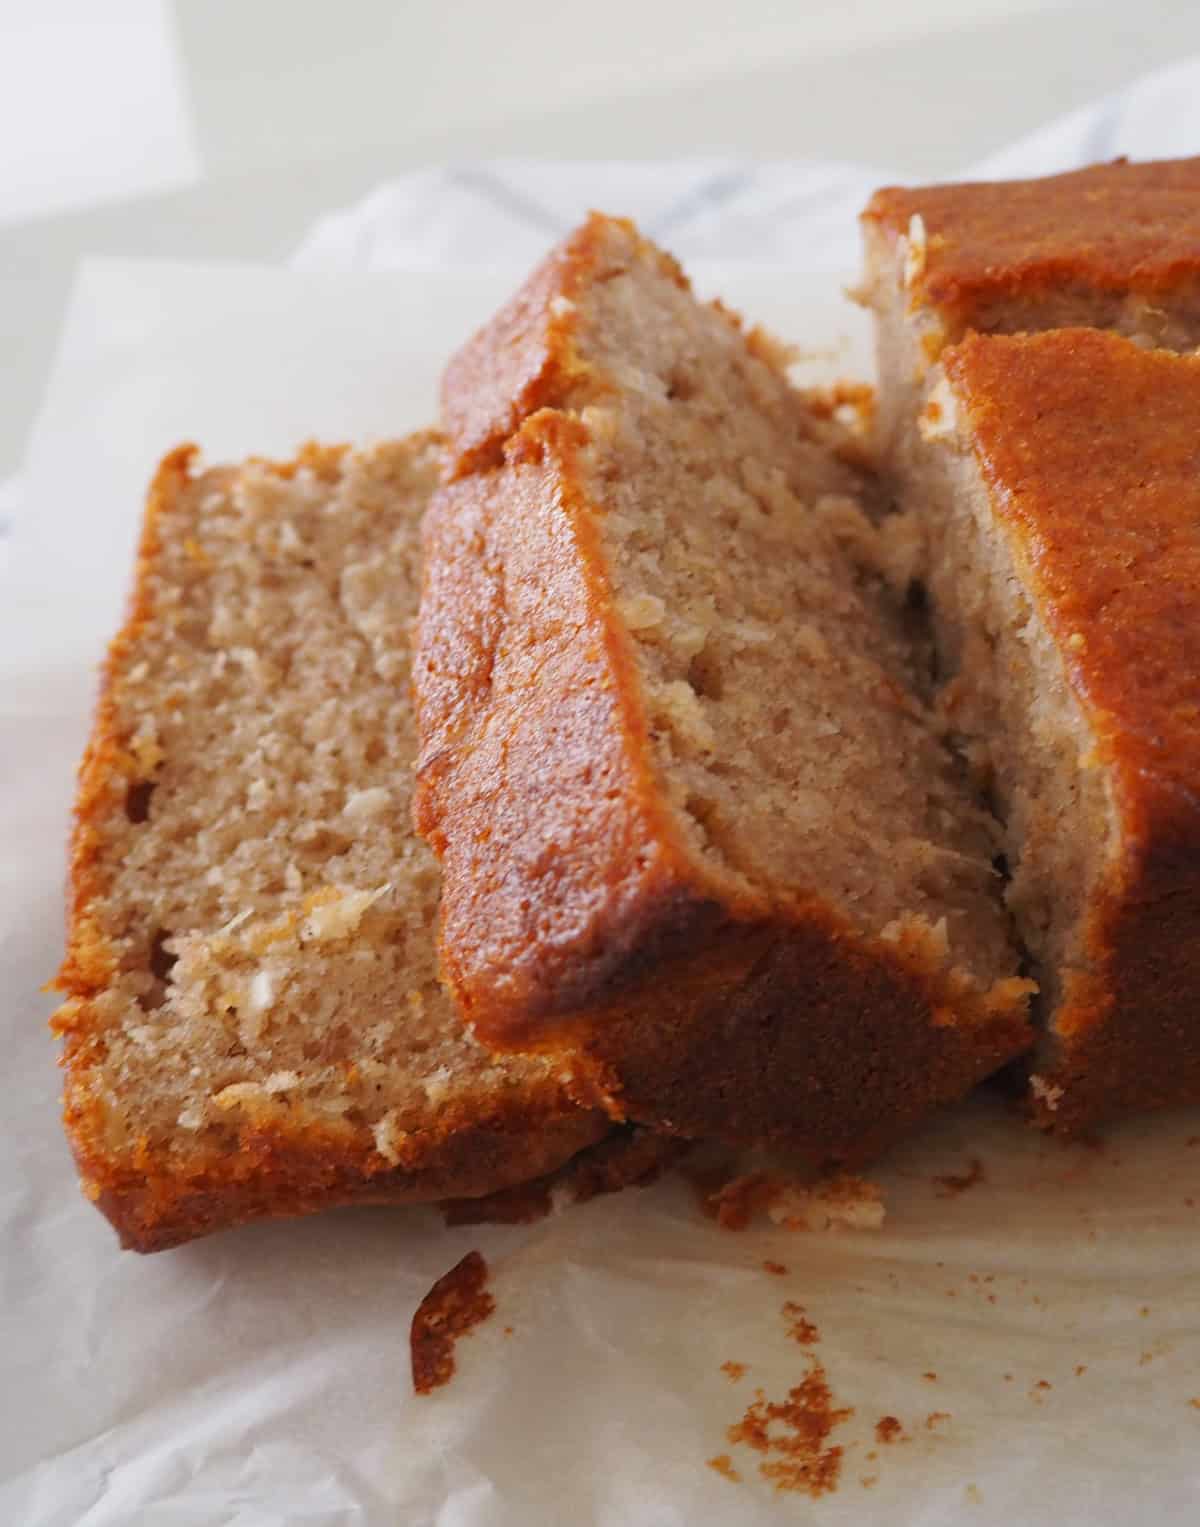 Side view of sliced Banana and Pineapple Cake on a piece of baking paper.